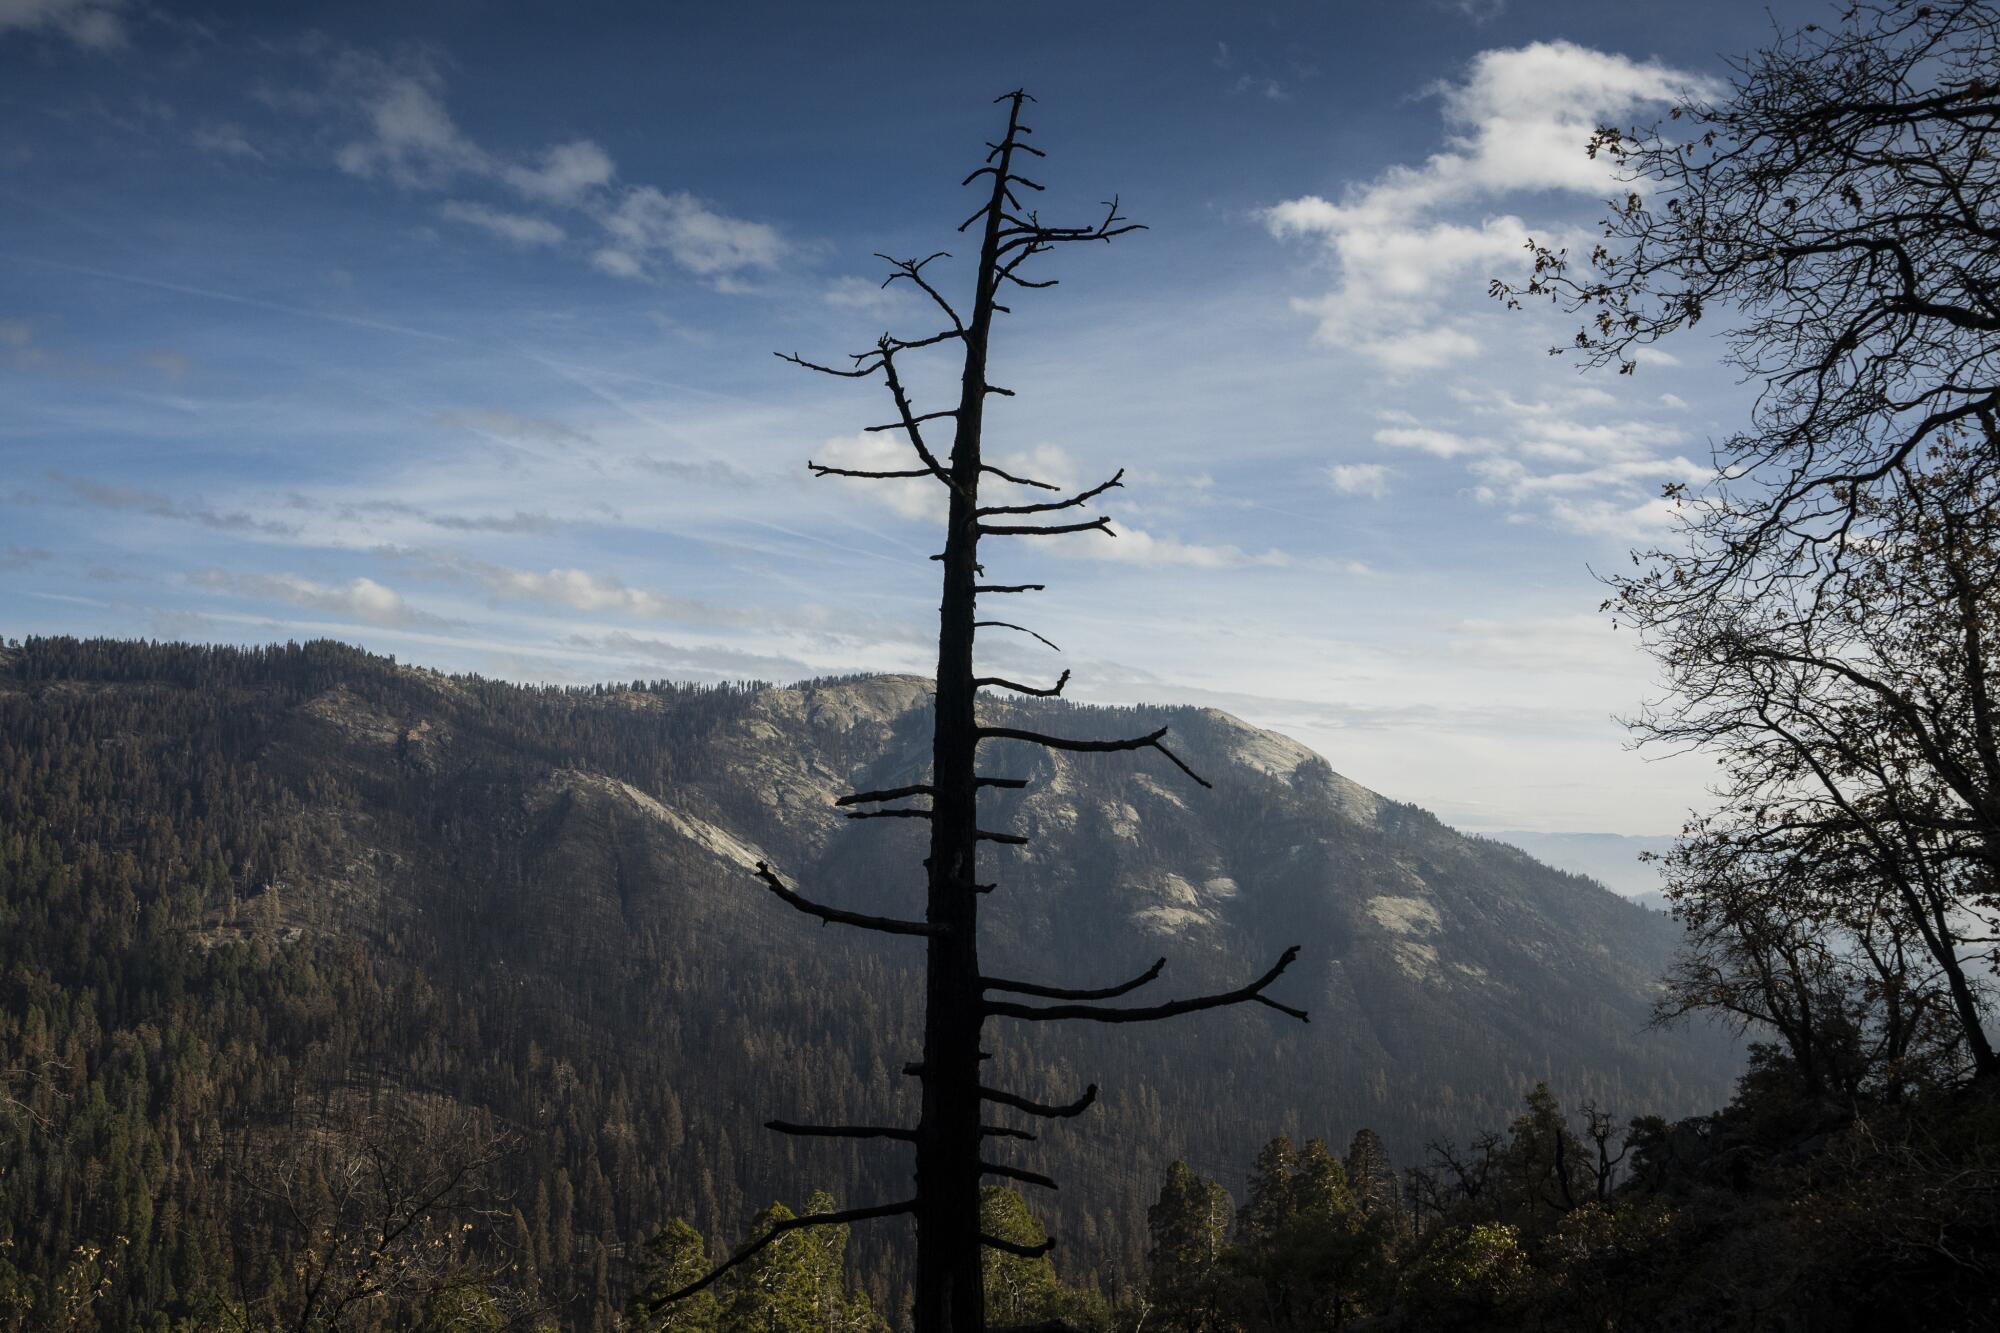 A burned tree silhouetted against distant mountains.